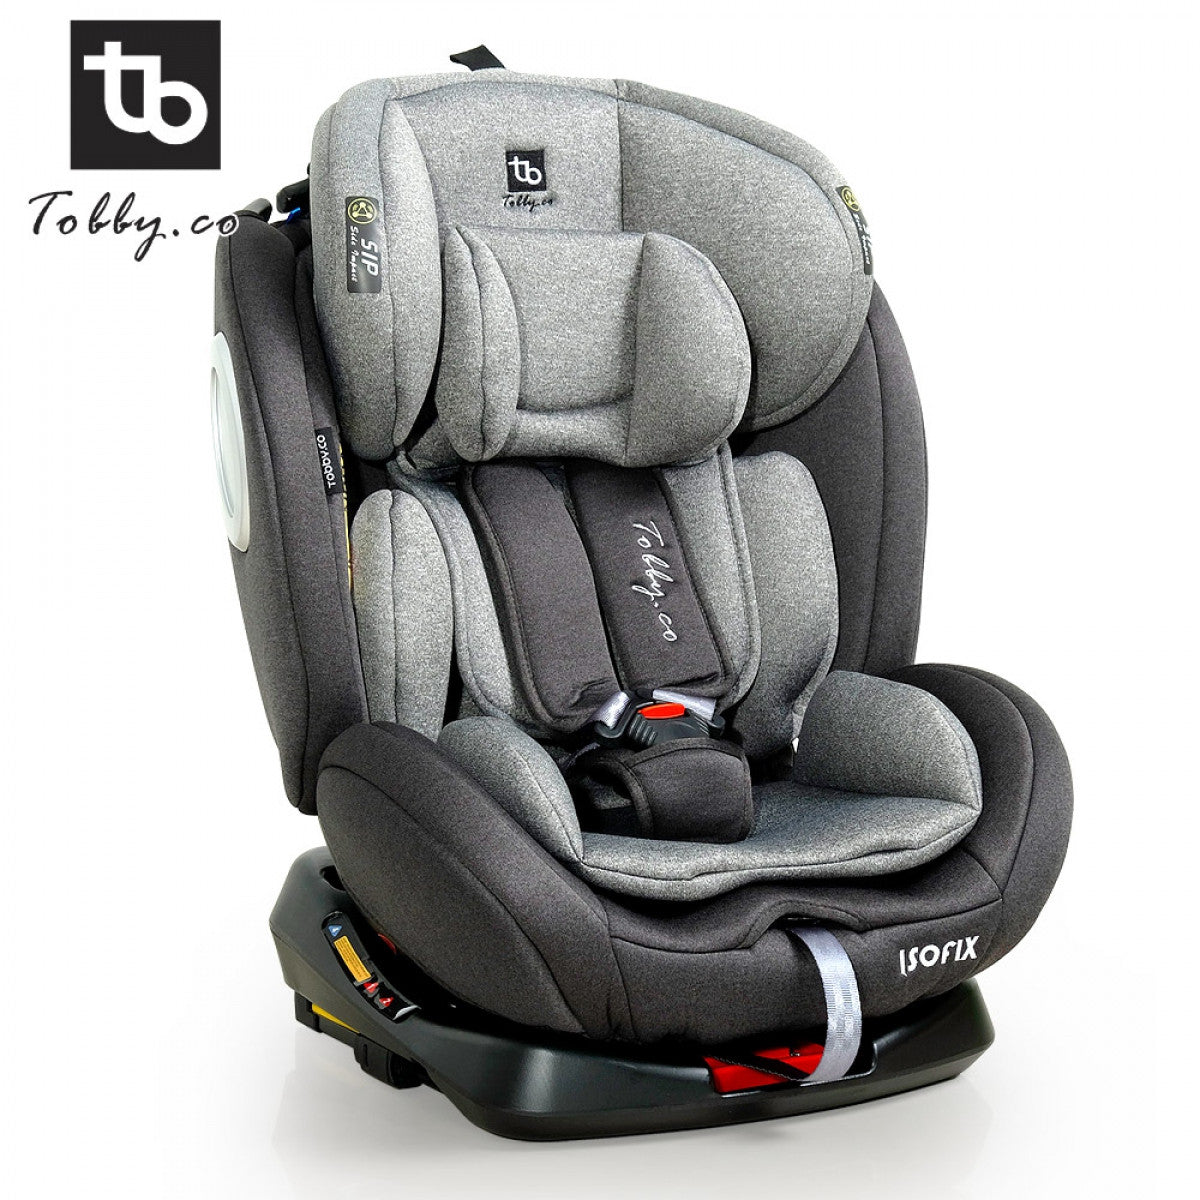 Tobby My Dear Belt/Isofix 360 Degrees Convertible Child Safety Car Seat 30035